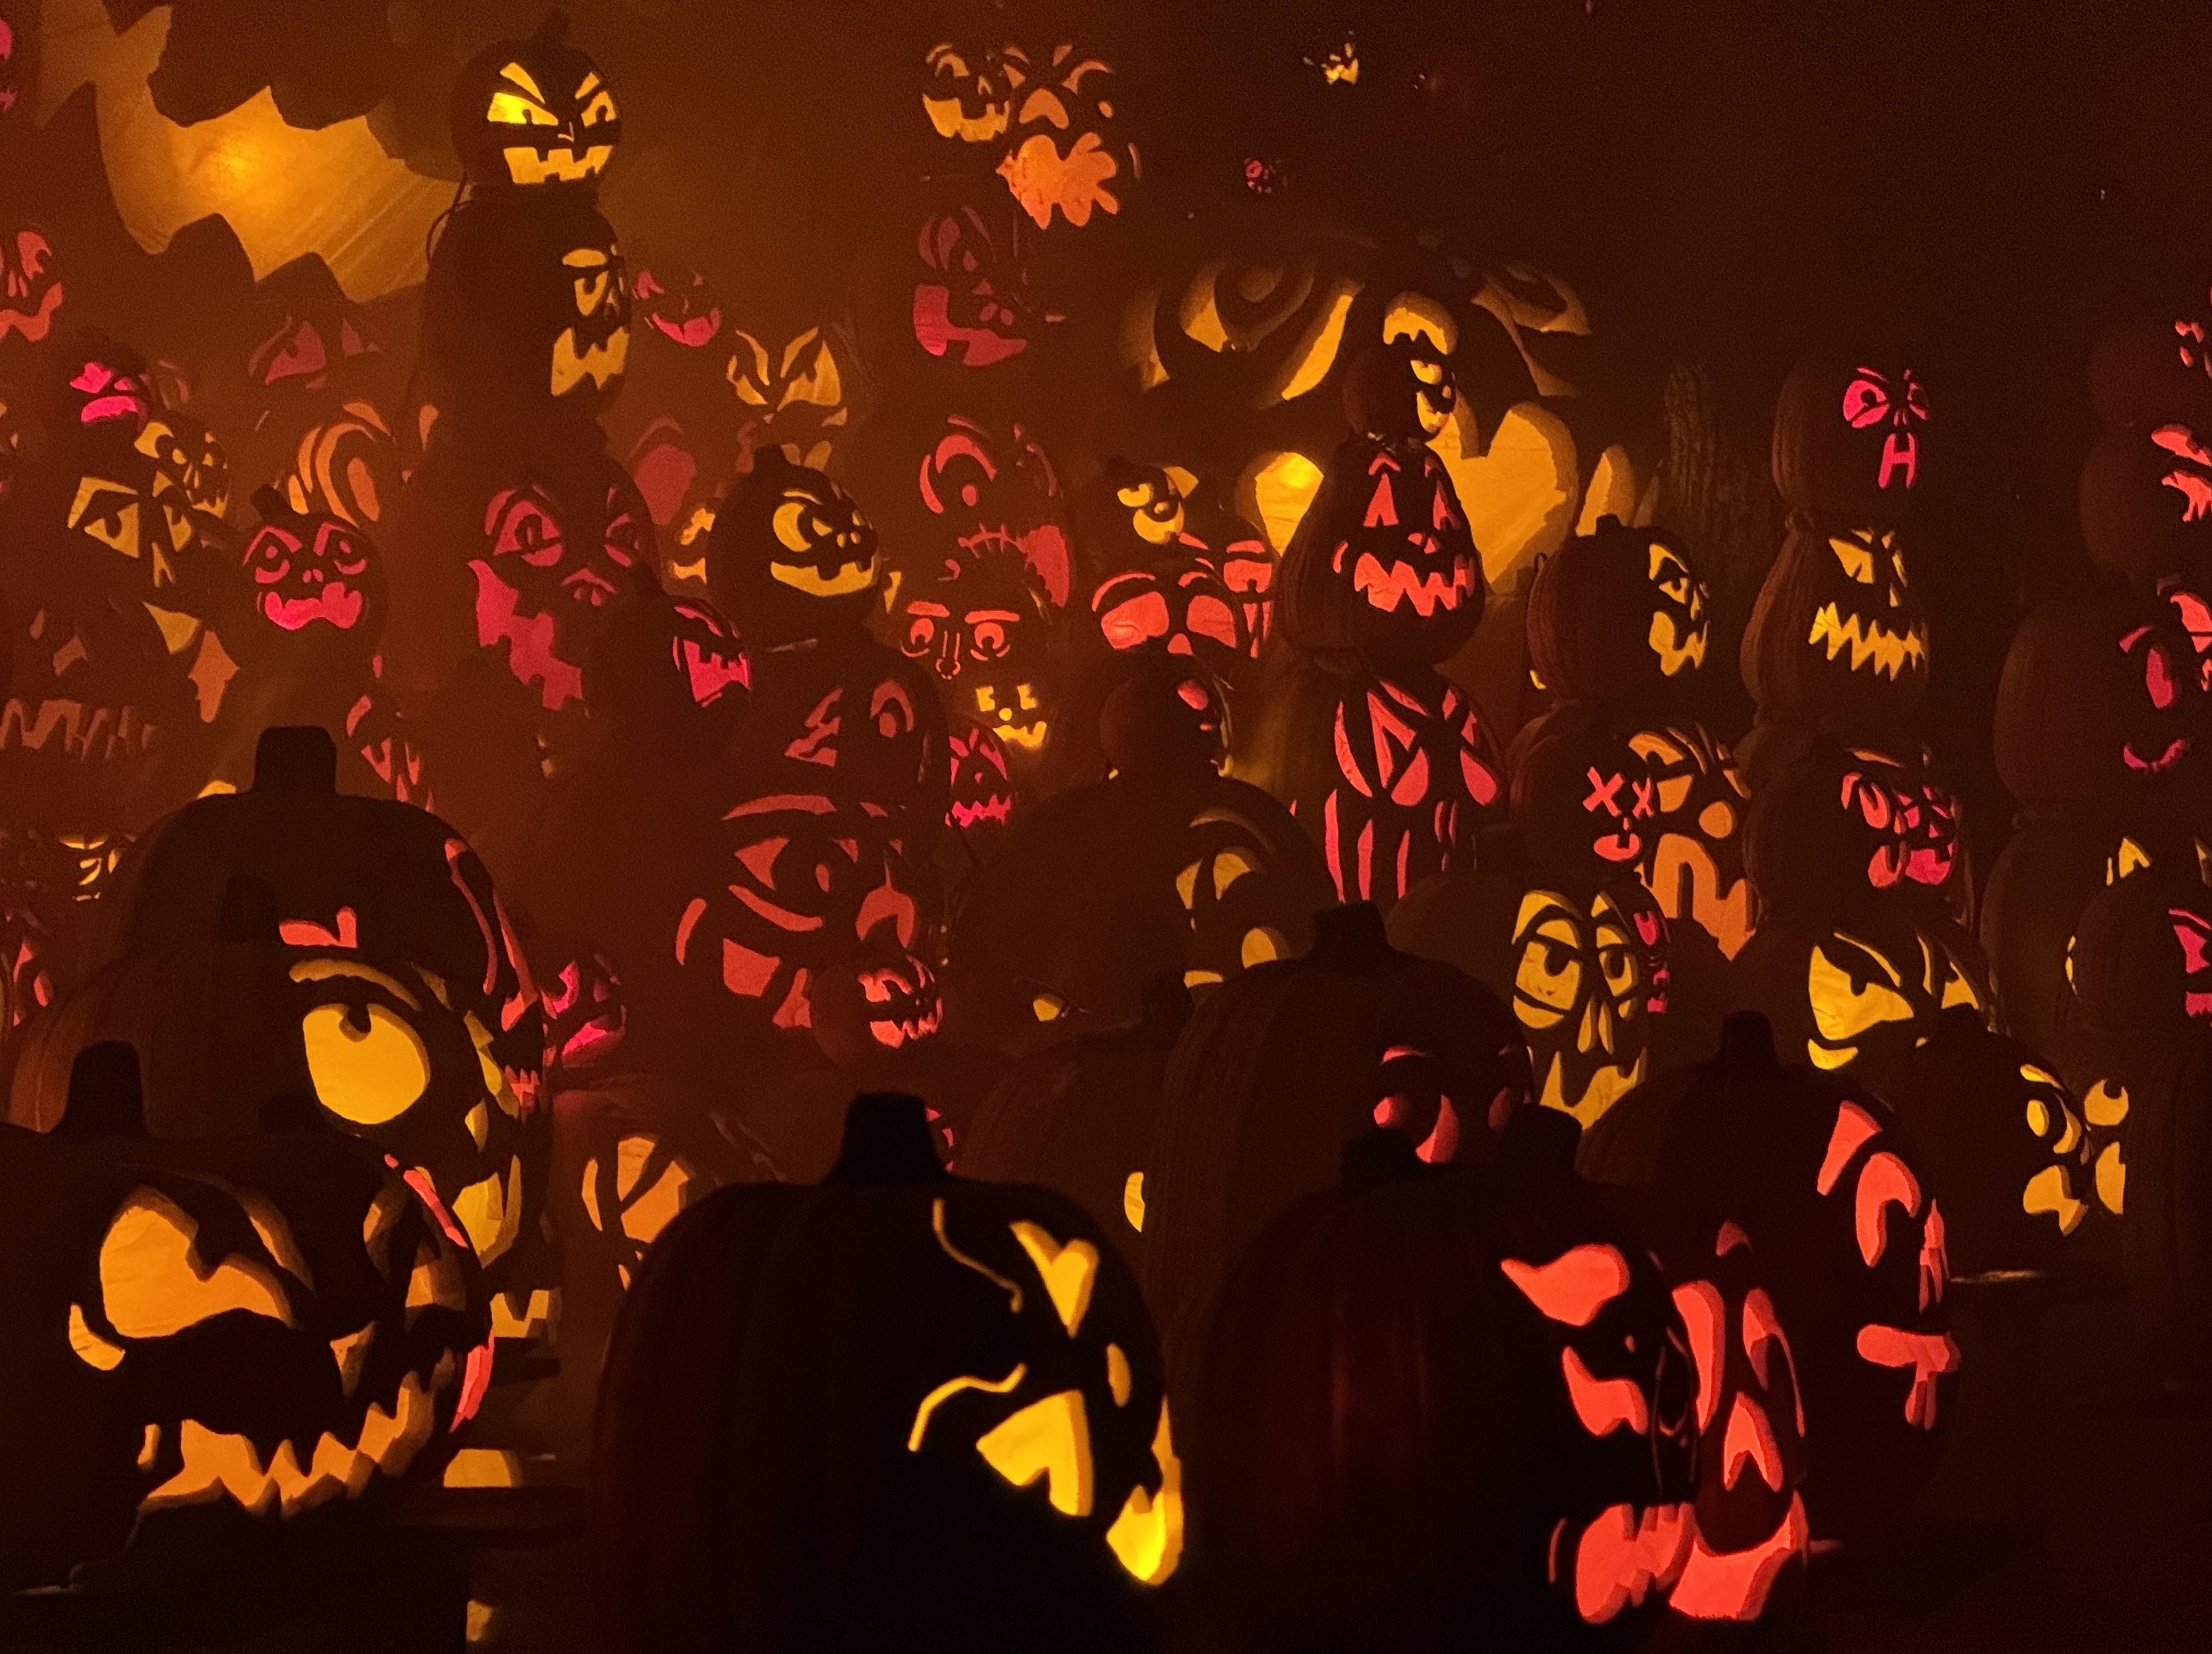 A whole bunch of carved pumpkins on the foggy trail at the Minnesota Zoo bathed in an orange glow